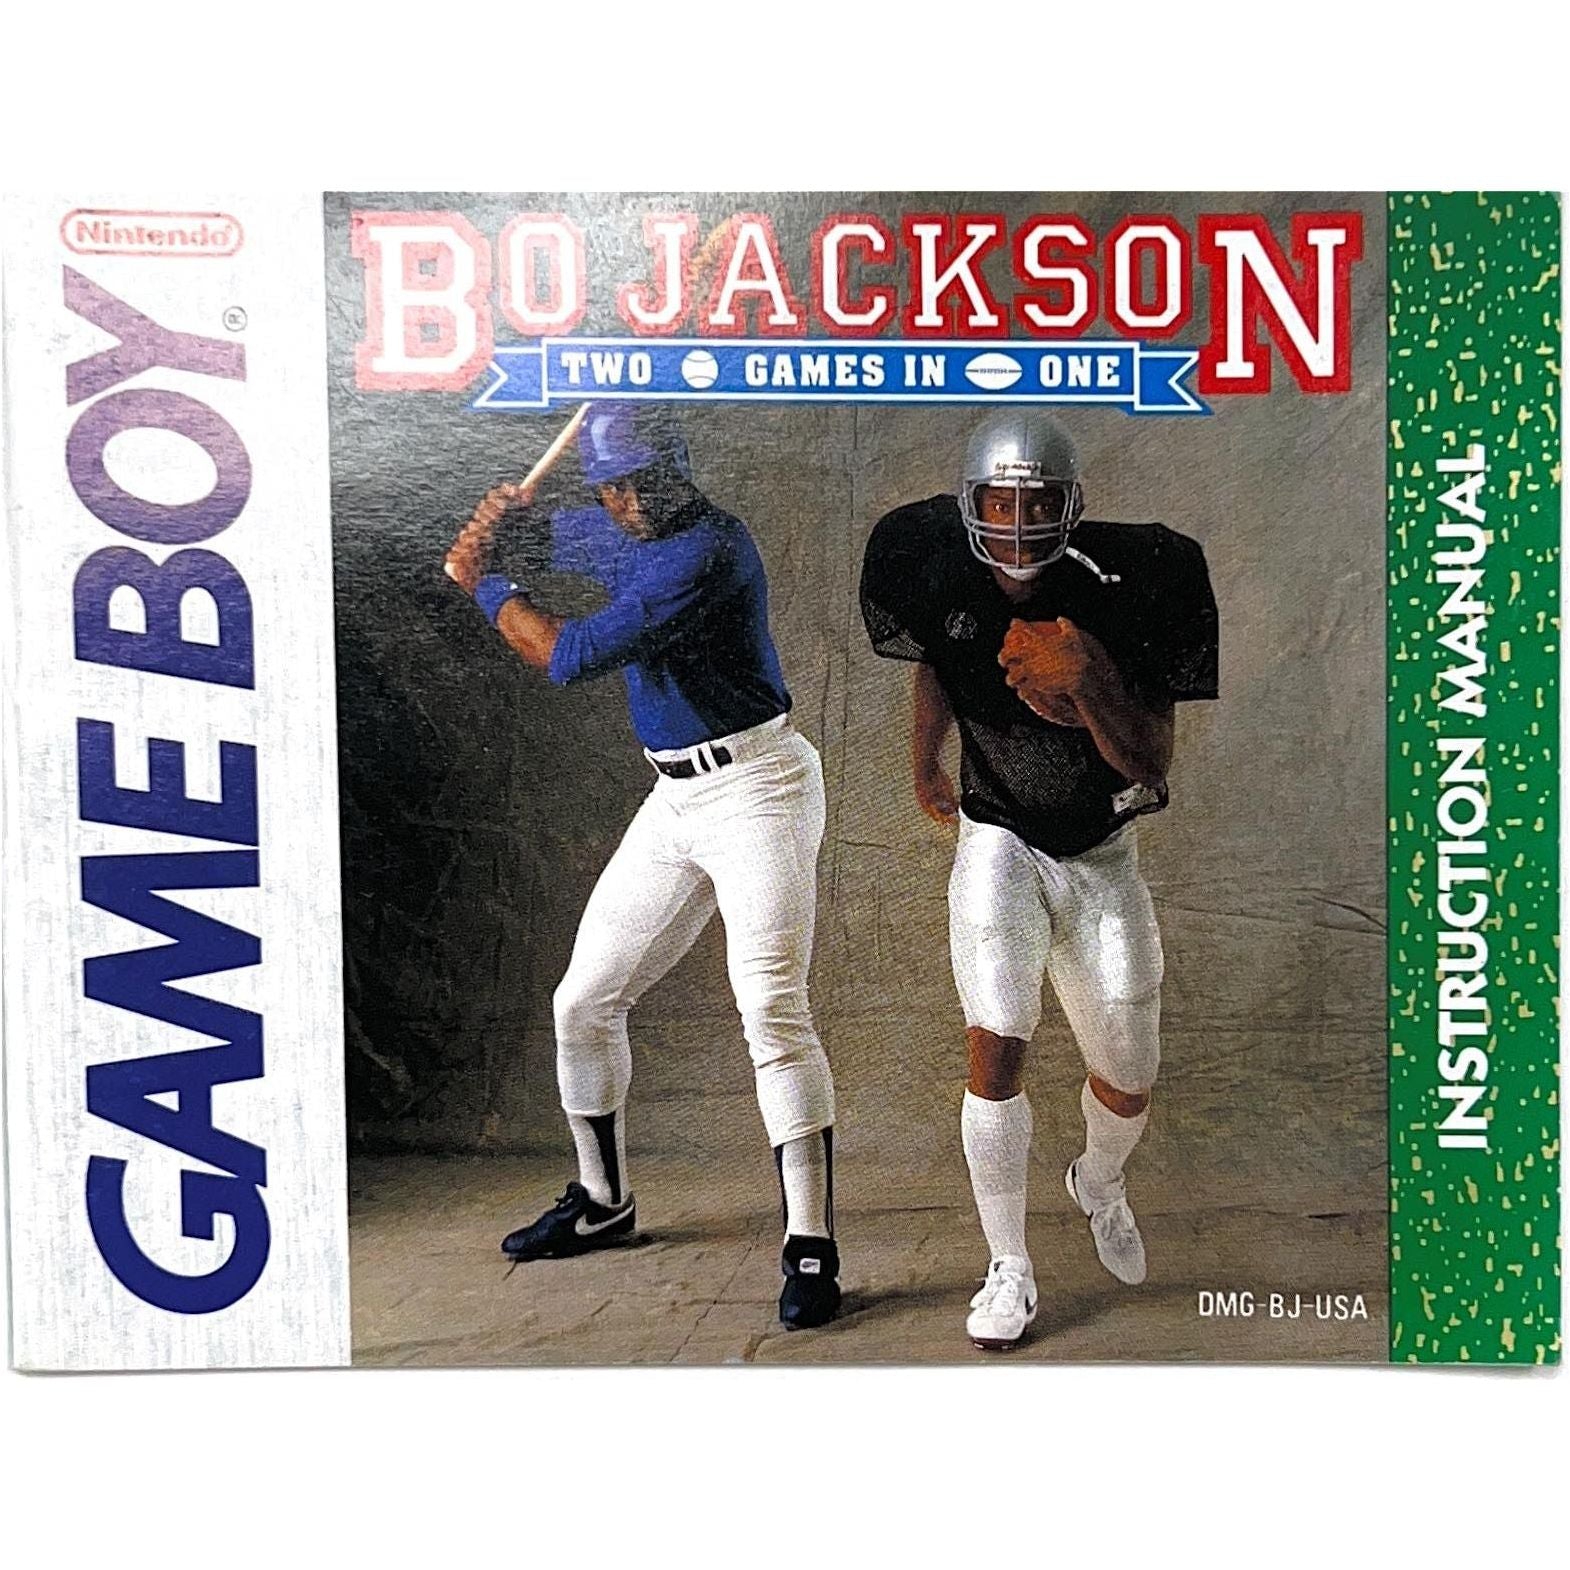 GB - Bo Jackson Two Games in One (Manual)